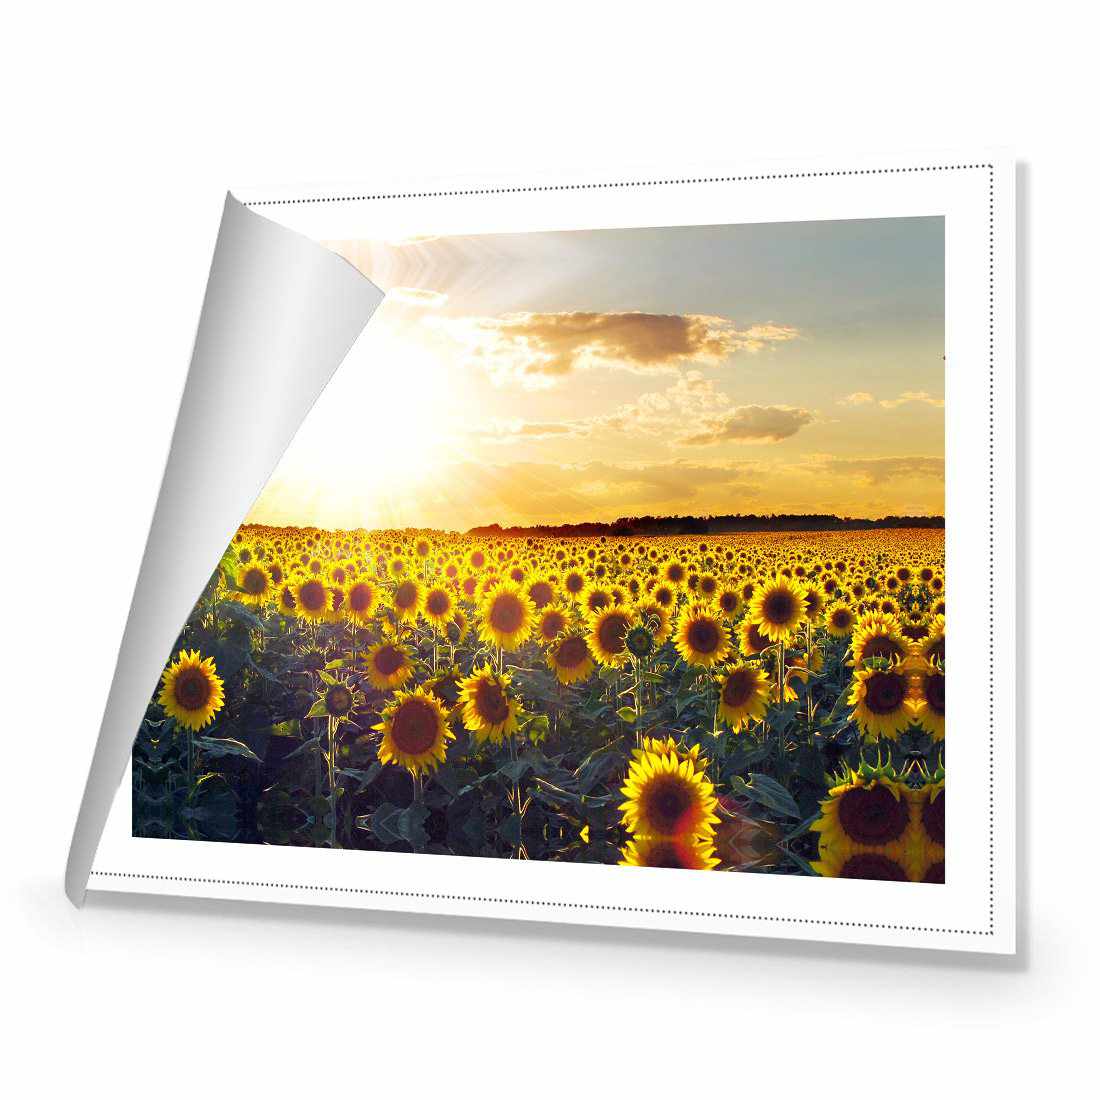 Sunflowers At Sunset Canvas Art-Canvas-Wall Art Designs-45x30cm-Rolled Canvas-Wall Art Designs